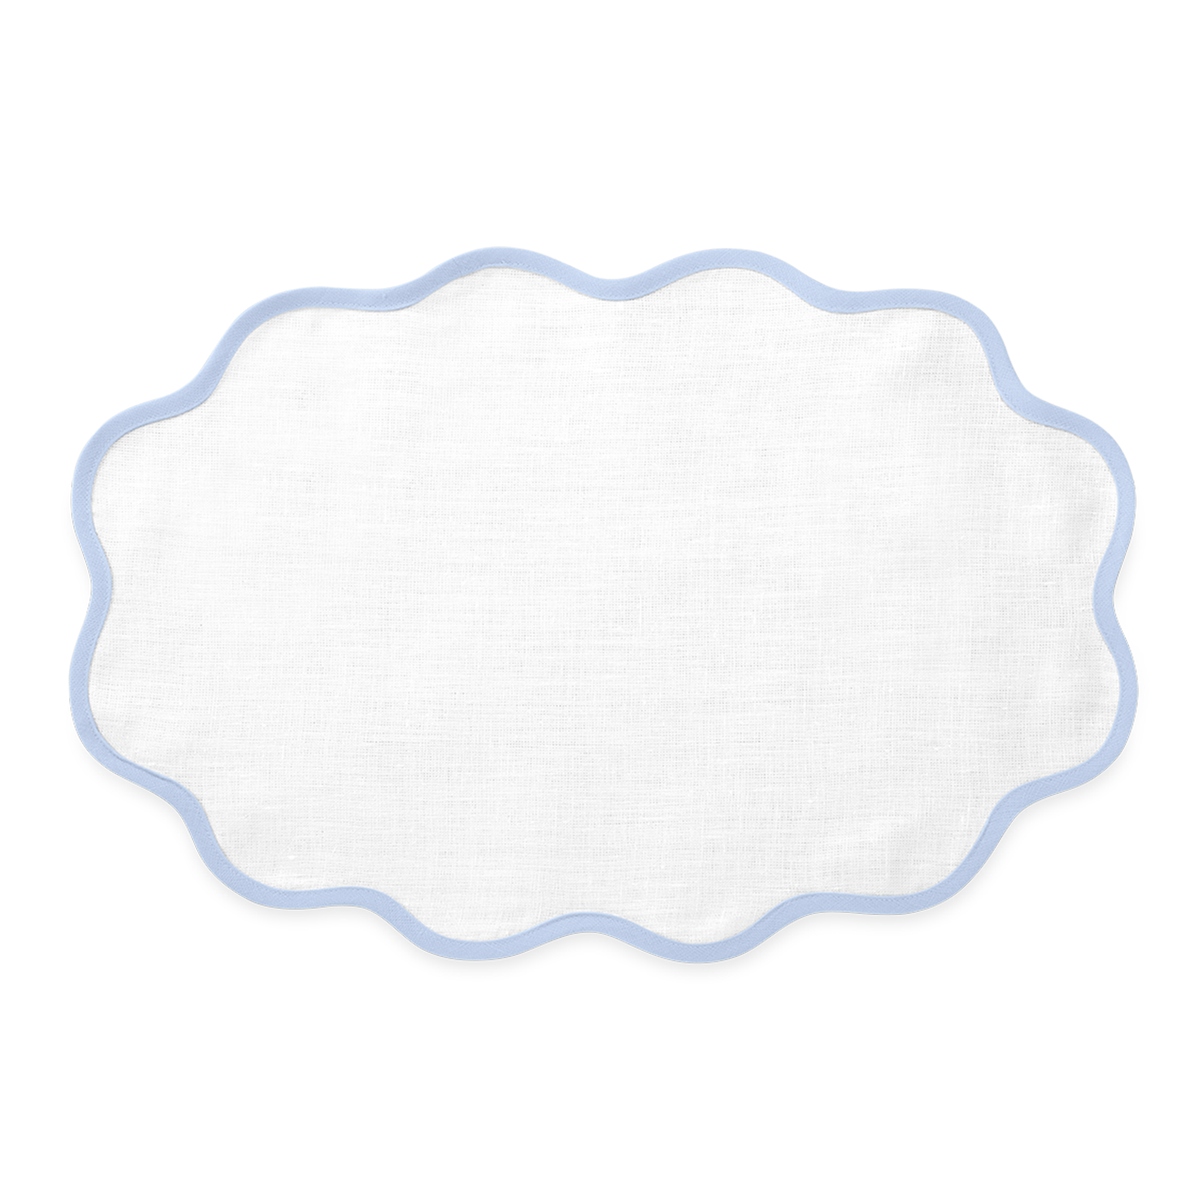 Oval Placemat of Matouk Scallop Edge Table Linens in Color Ice Blue